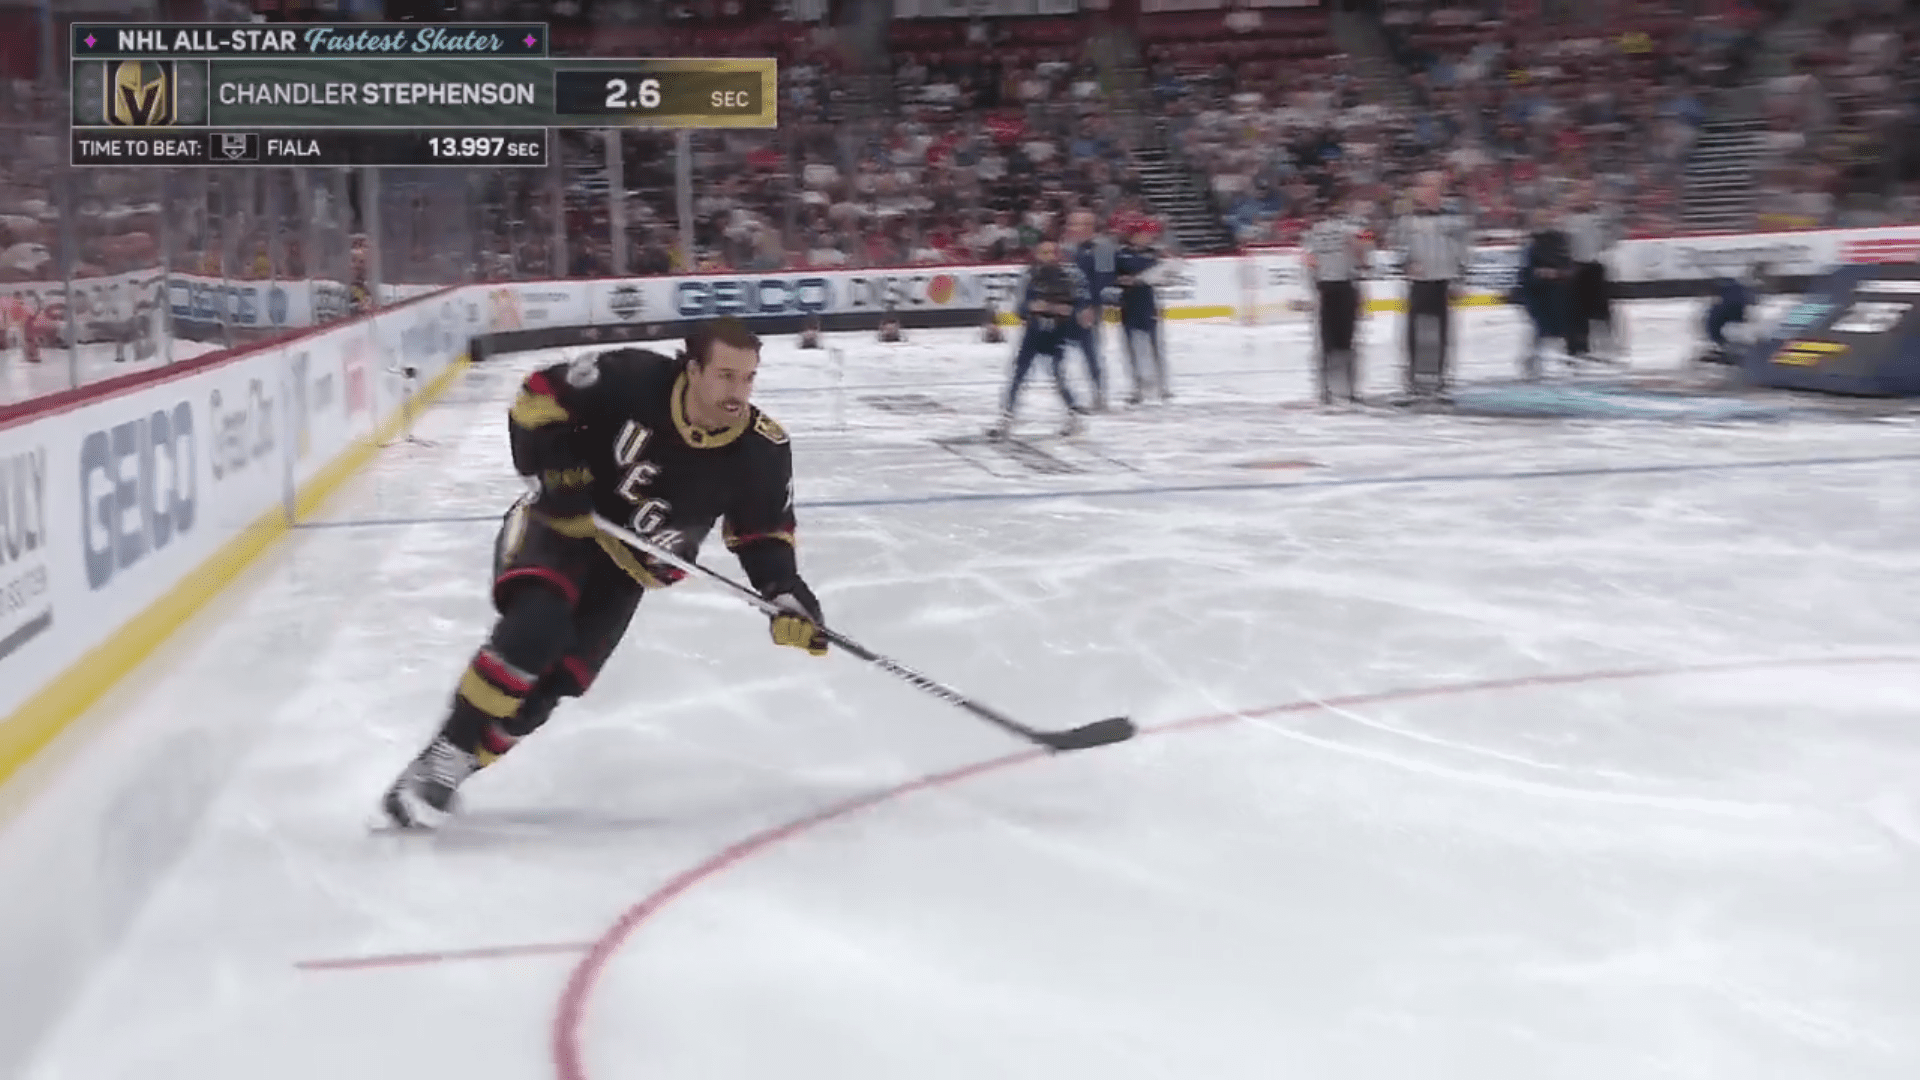 WATCH Golden Knights Chandler Stephenson Competes in Fastest Skater